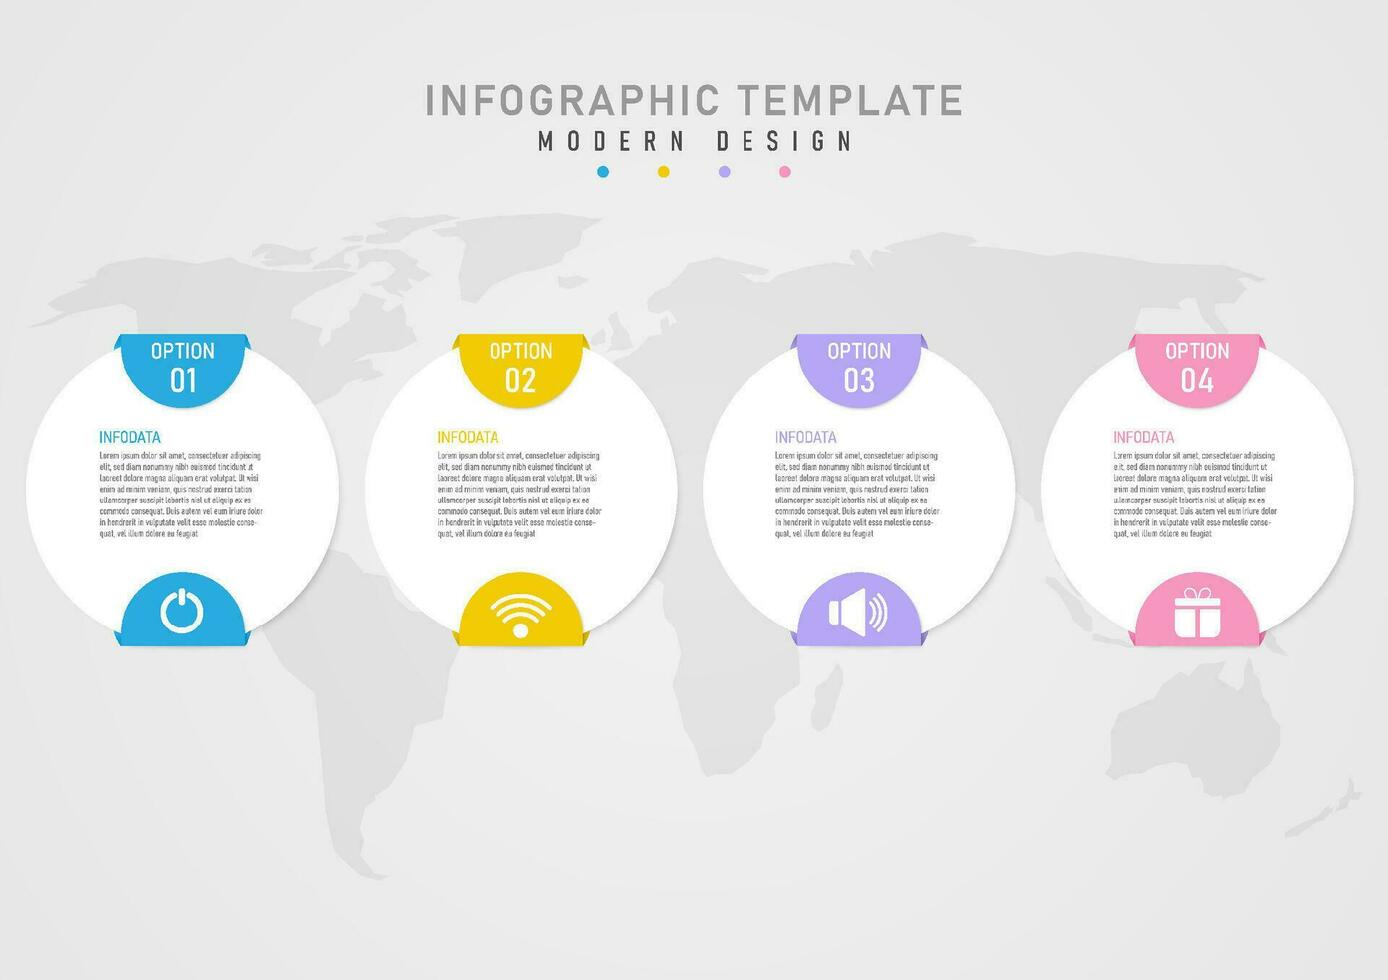 Infographic template 4 options simple business white circle text top center pastel colored semicircle Multi-colored top and bottom White icon below the map below. gray gradient background vector